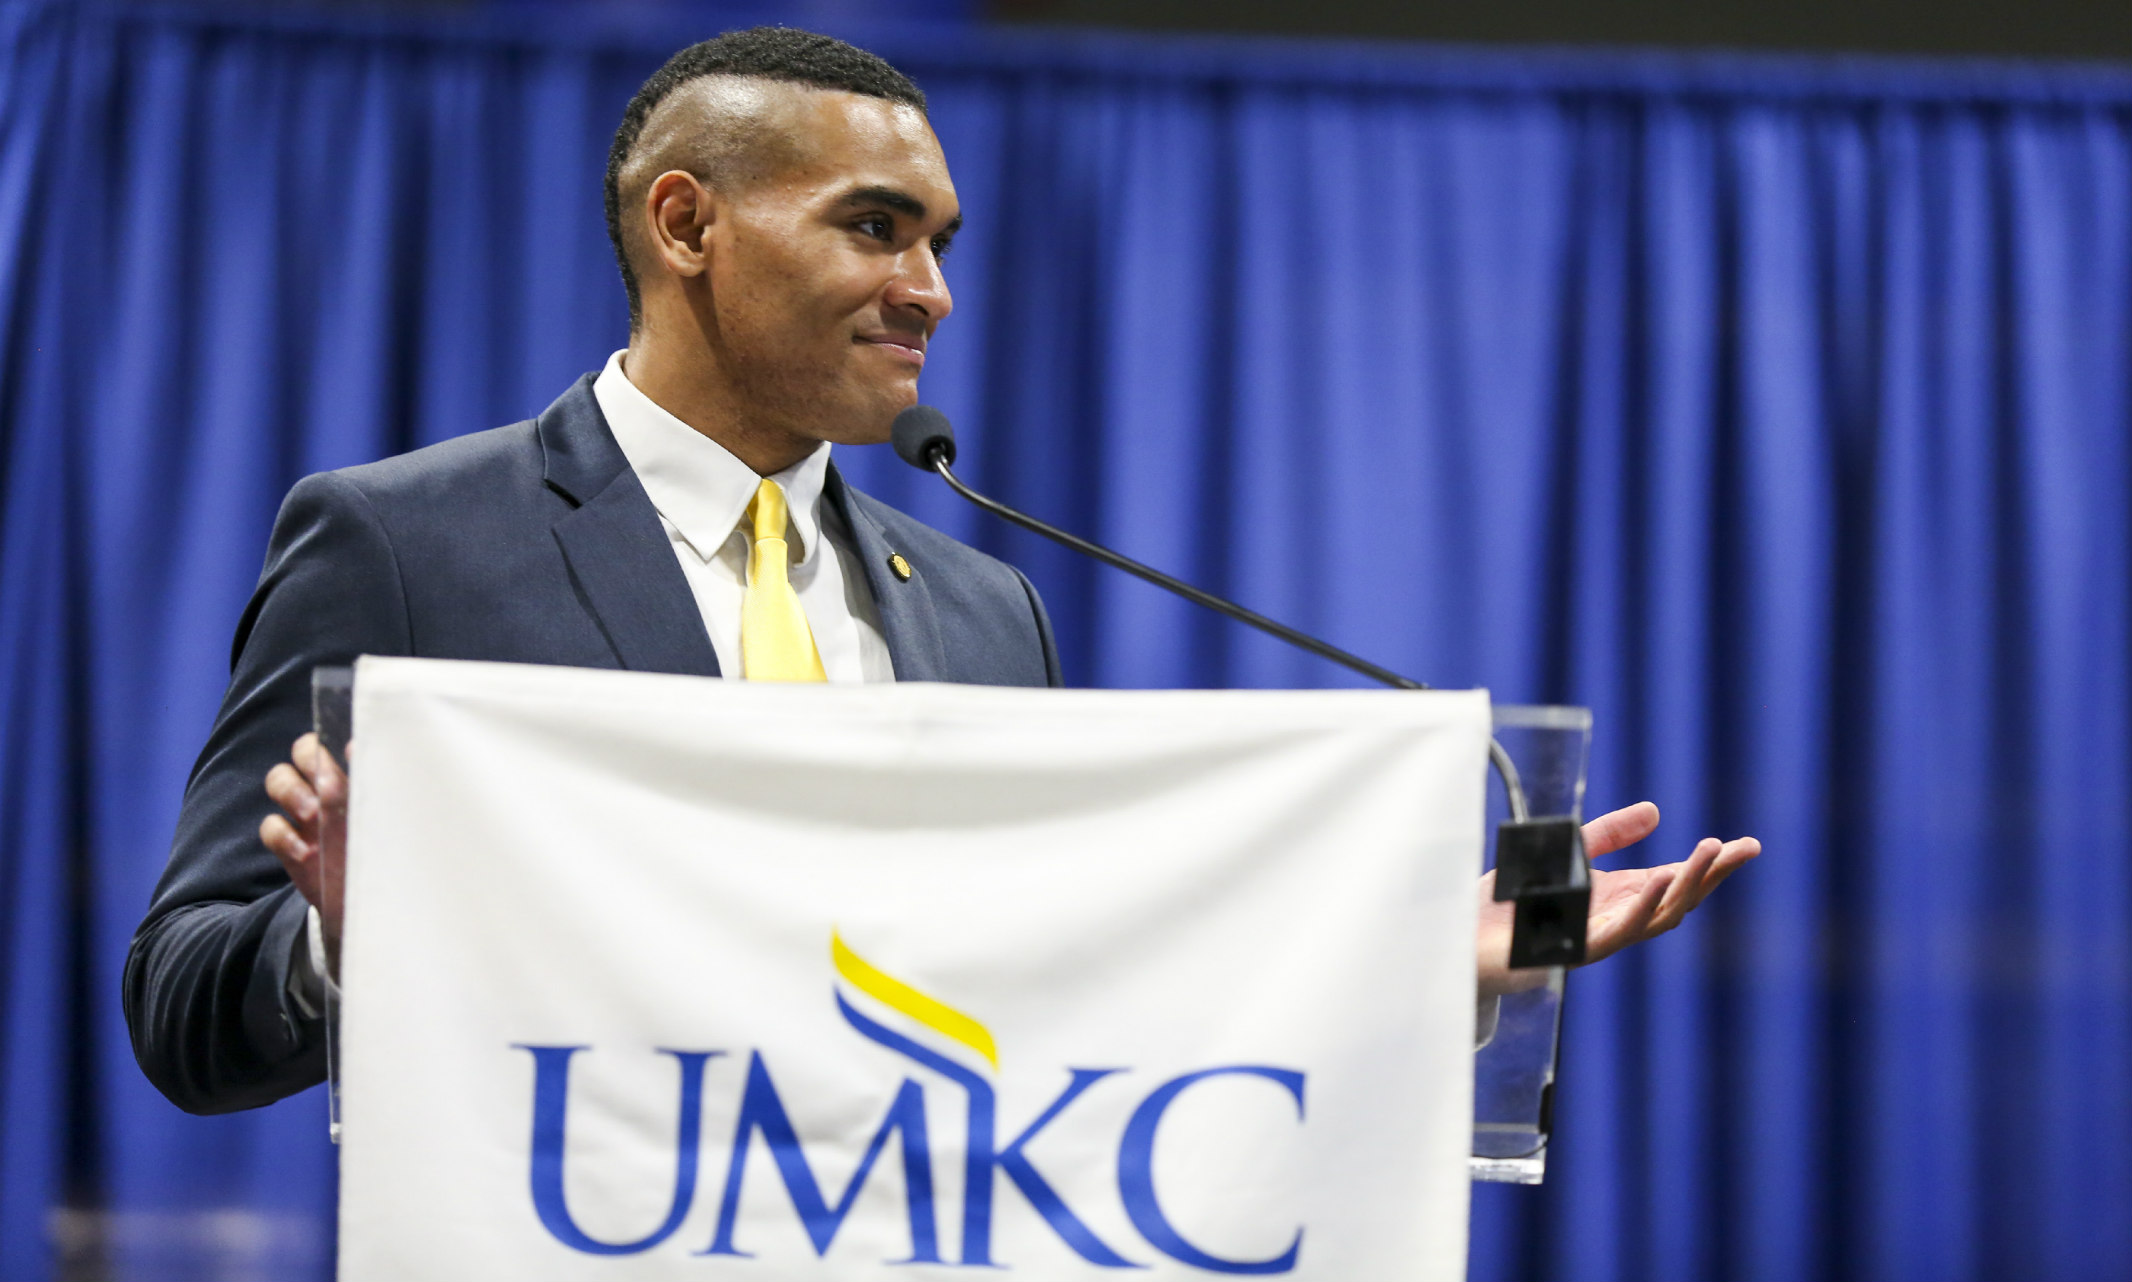 UMKC Student President Justice Horn stands at a podium